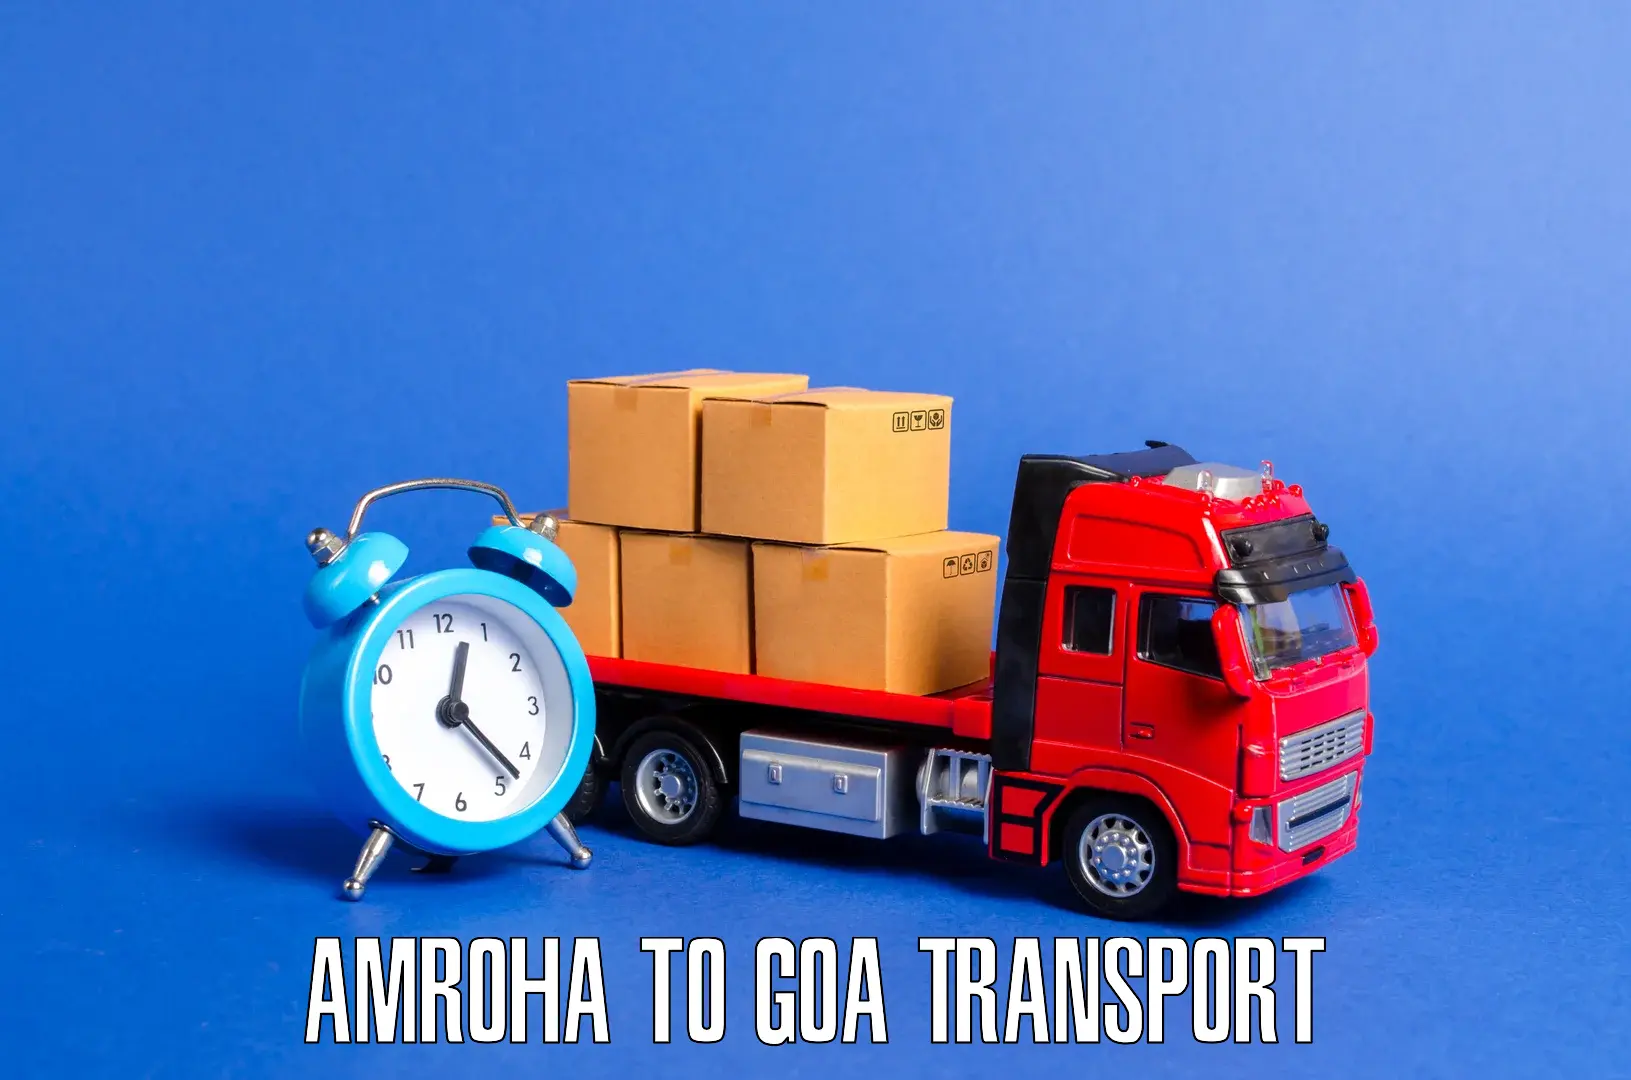 Container transport service Amroha to Goa